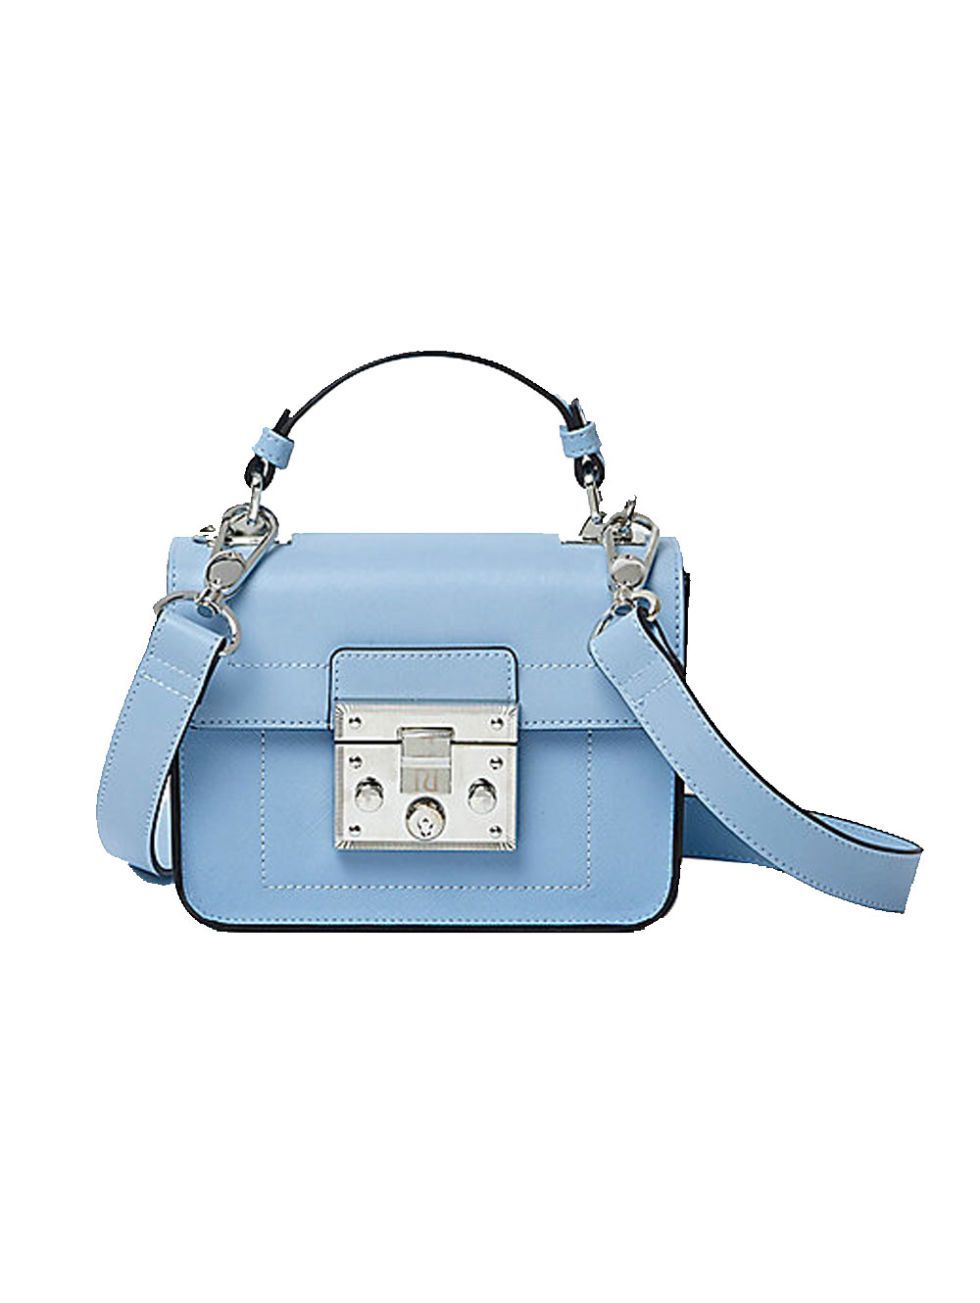 Bag, Handbag, Shoulder bag, Fashion accessory, Turquoise, Product, Leather, Satchel, Kelly bag, Luggage and bags, 